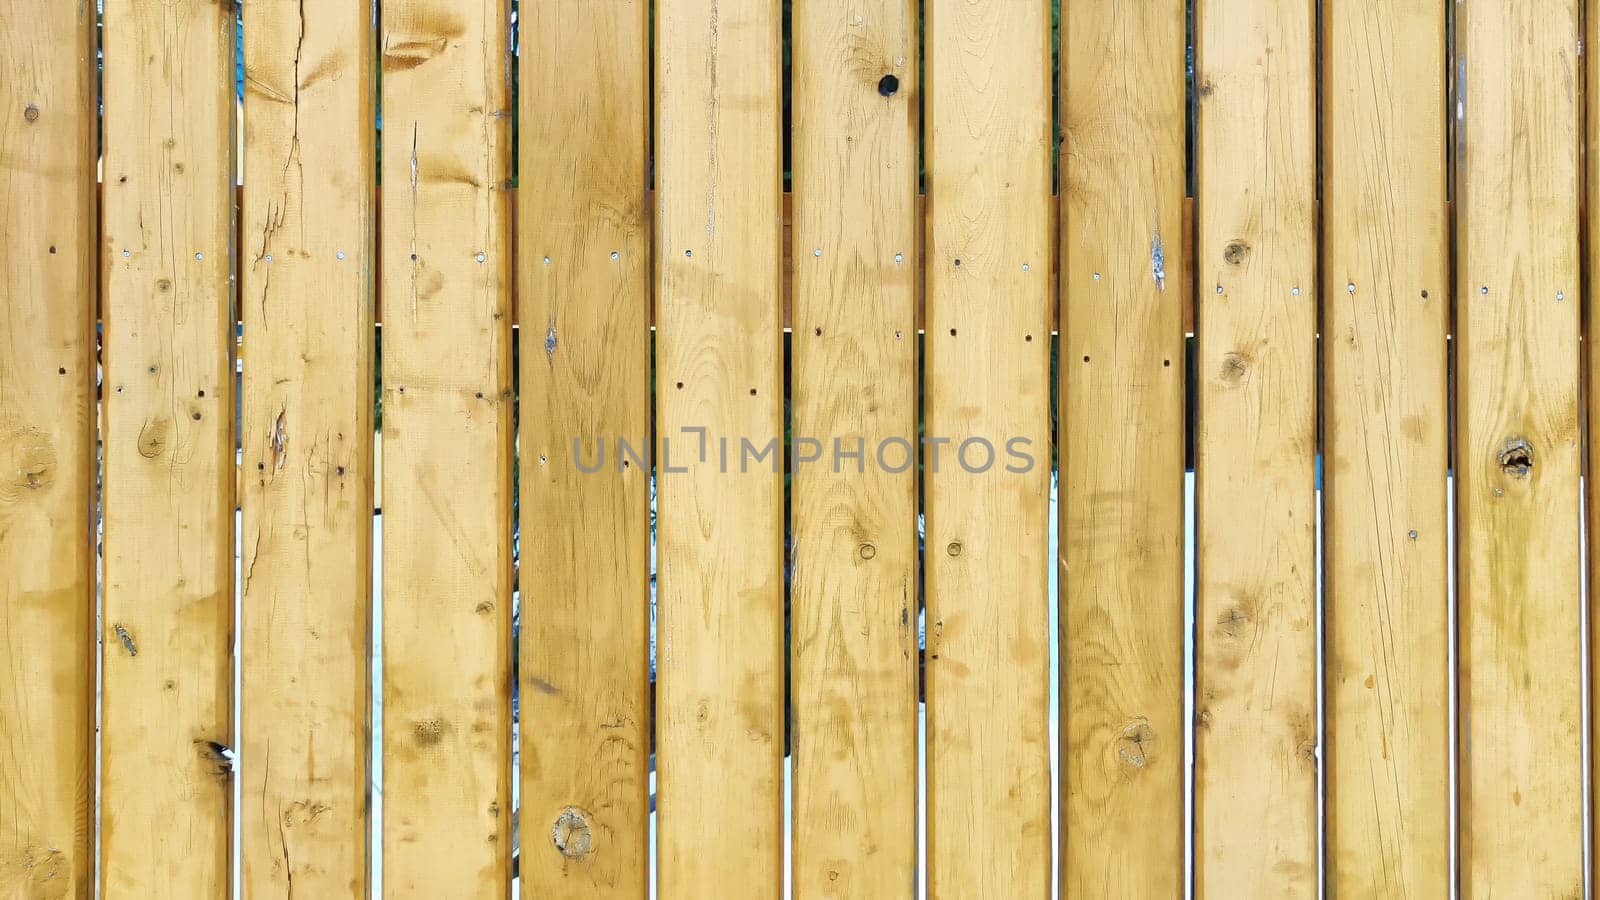 Fence made of wooden slats as Location, Background, texture, copy of space, frame. Abstract natural graphic resource